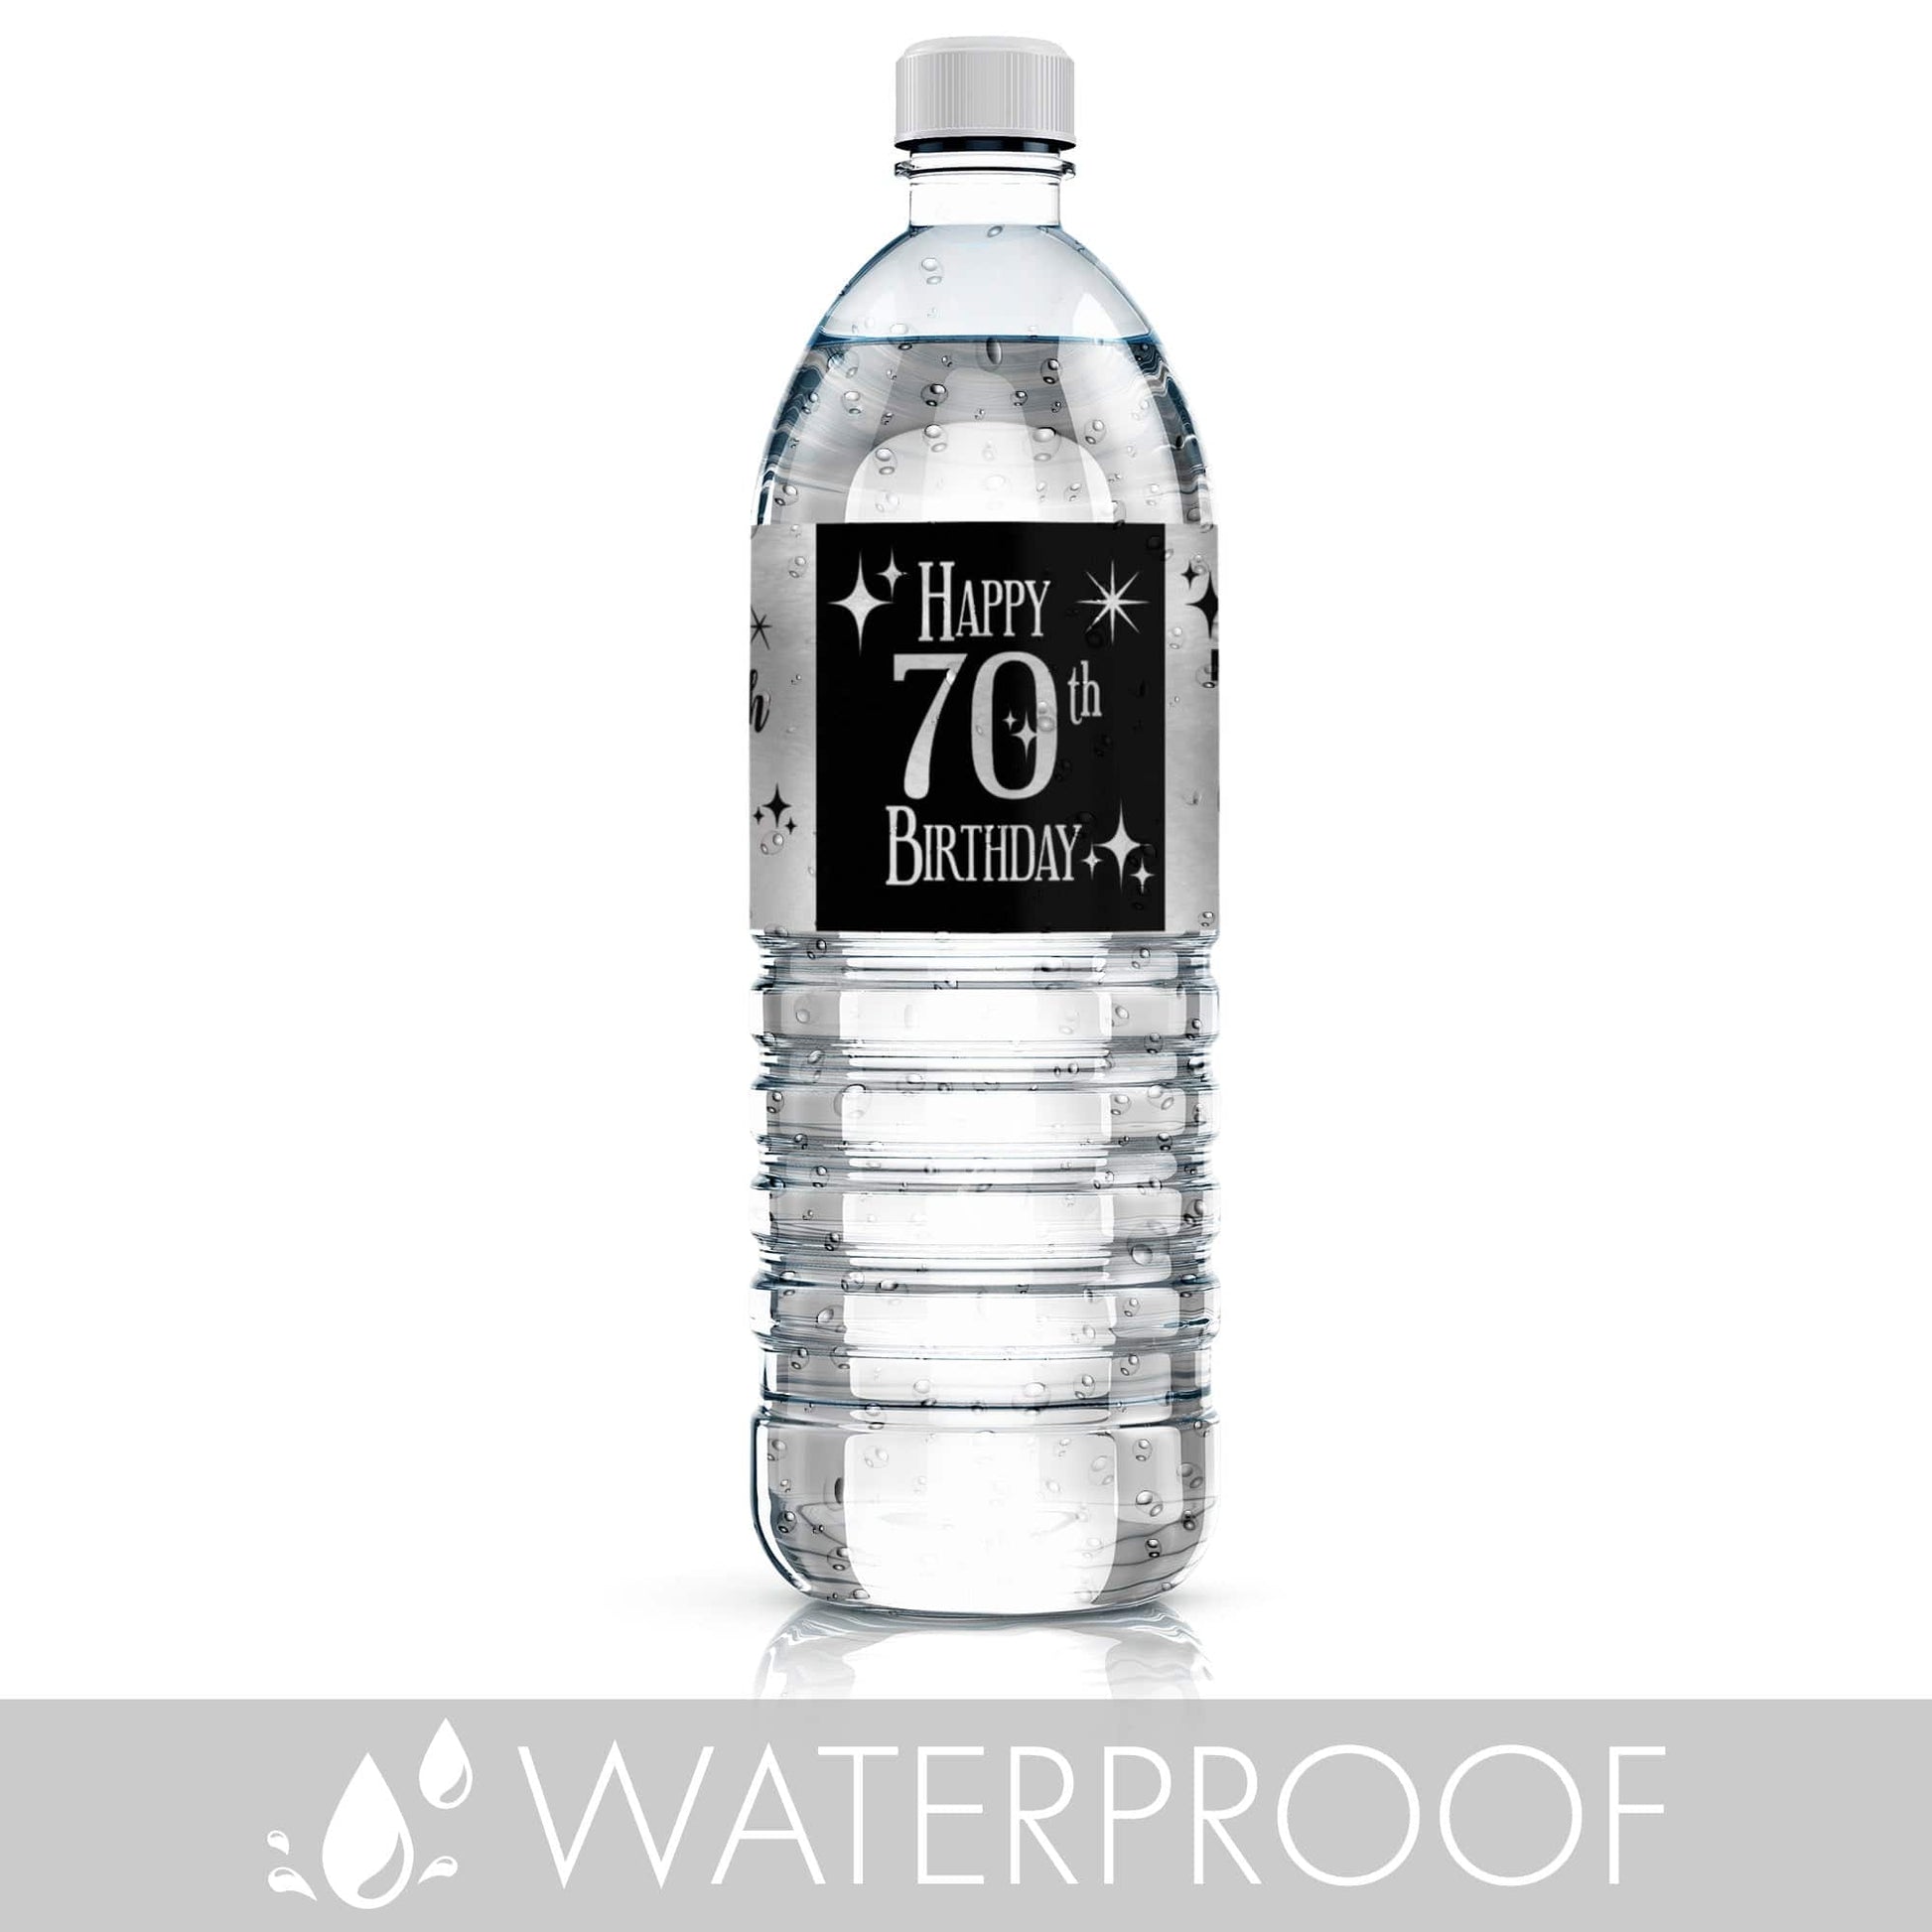 Celebrate in style with these black and silver 70th birthday water bottle labels.